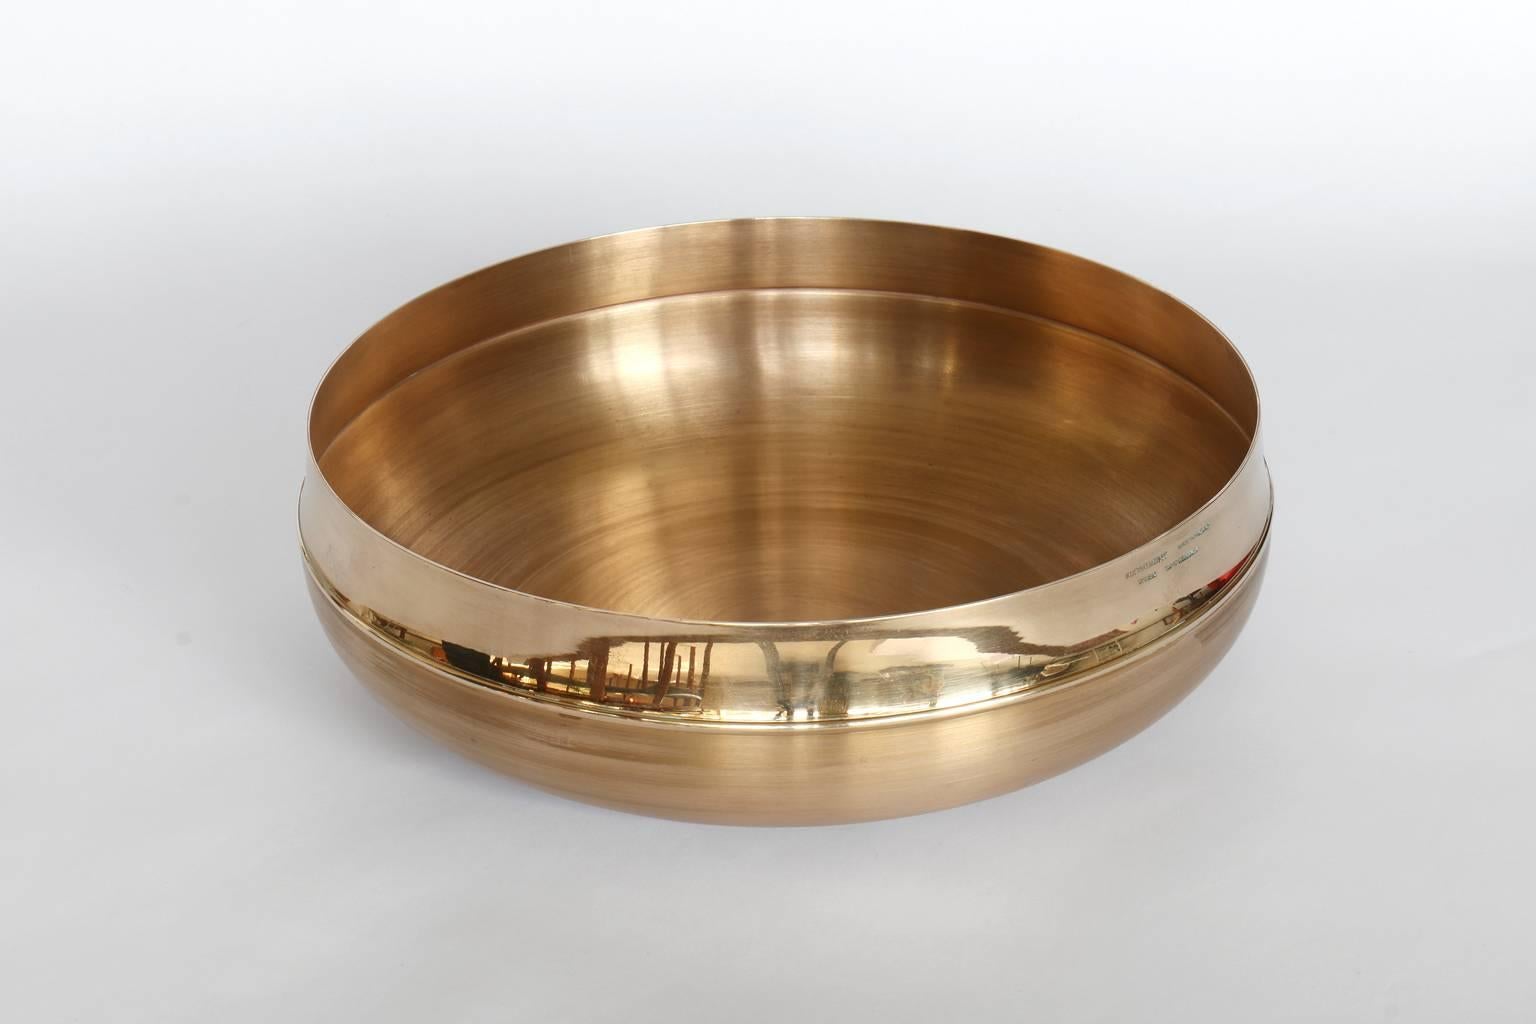 Designed in 1971.
Model TW446.
Handmade in bronze.
Signed with maker's mark.

A gorgeous vintage bronze bowl designed by legendary finish designer Tapio Wirkkala and manufactured by Kultakeskus Oy. This is the largest size produced in this